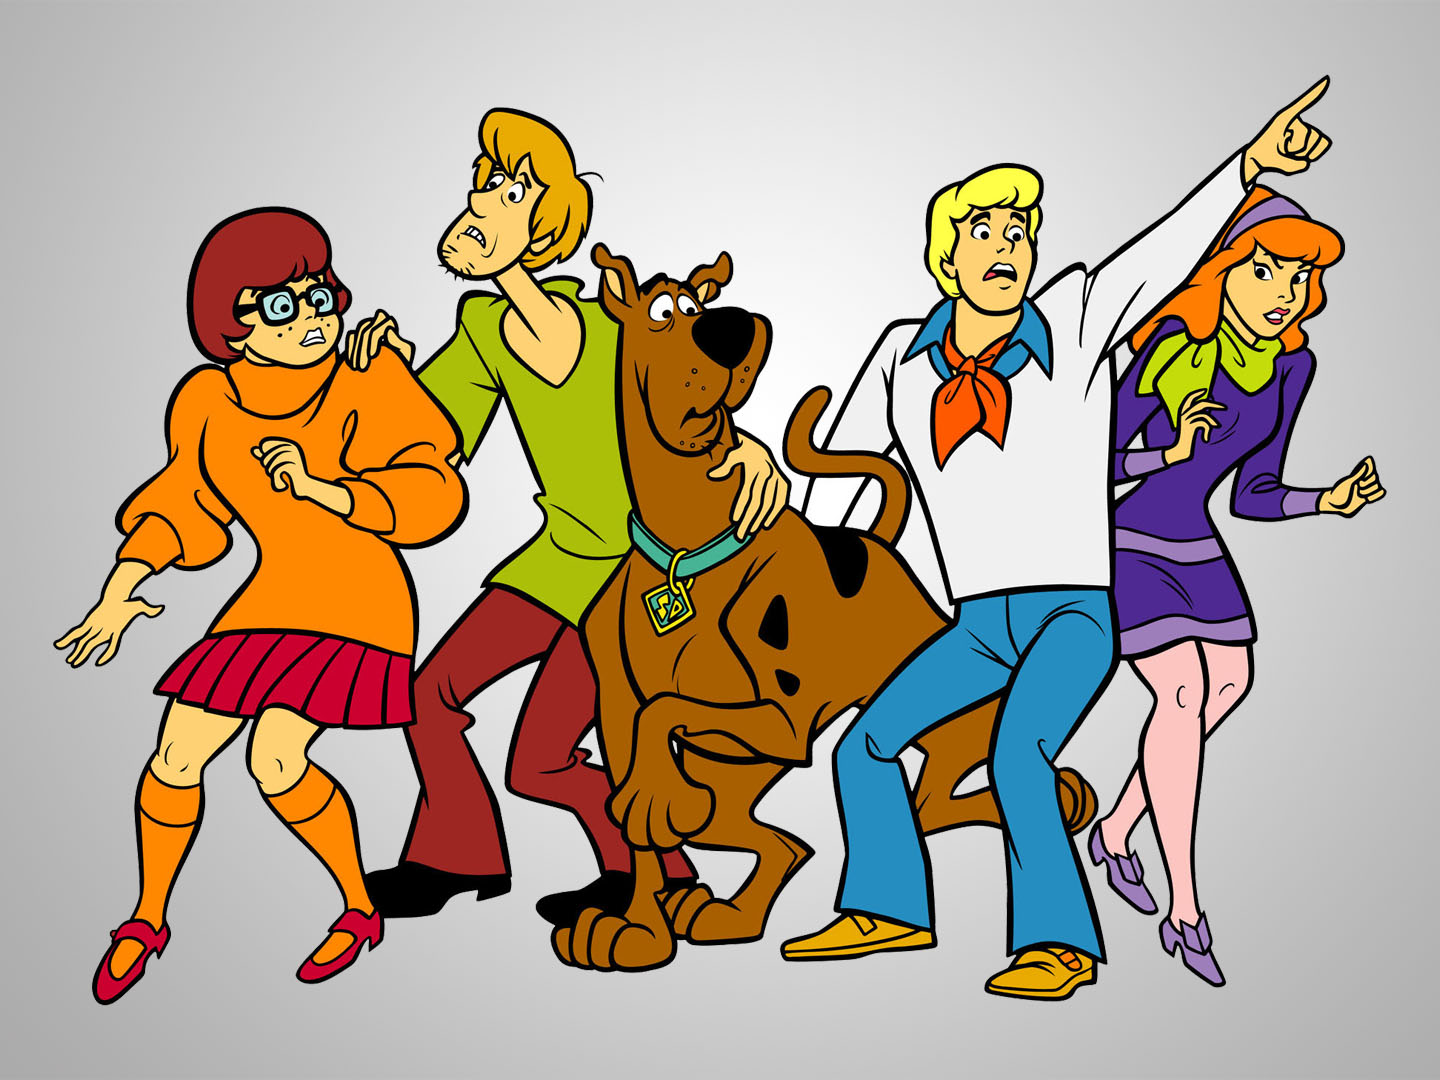 Scooby Scooby Doo Character - Riset